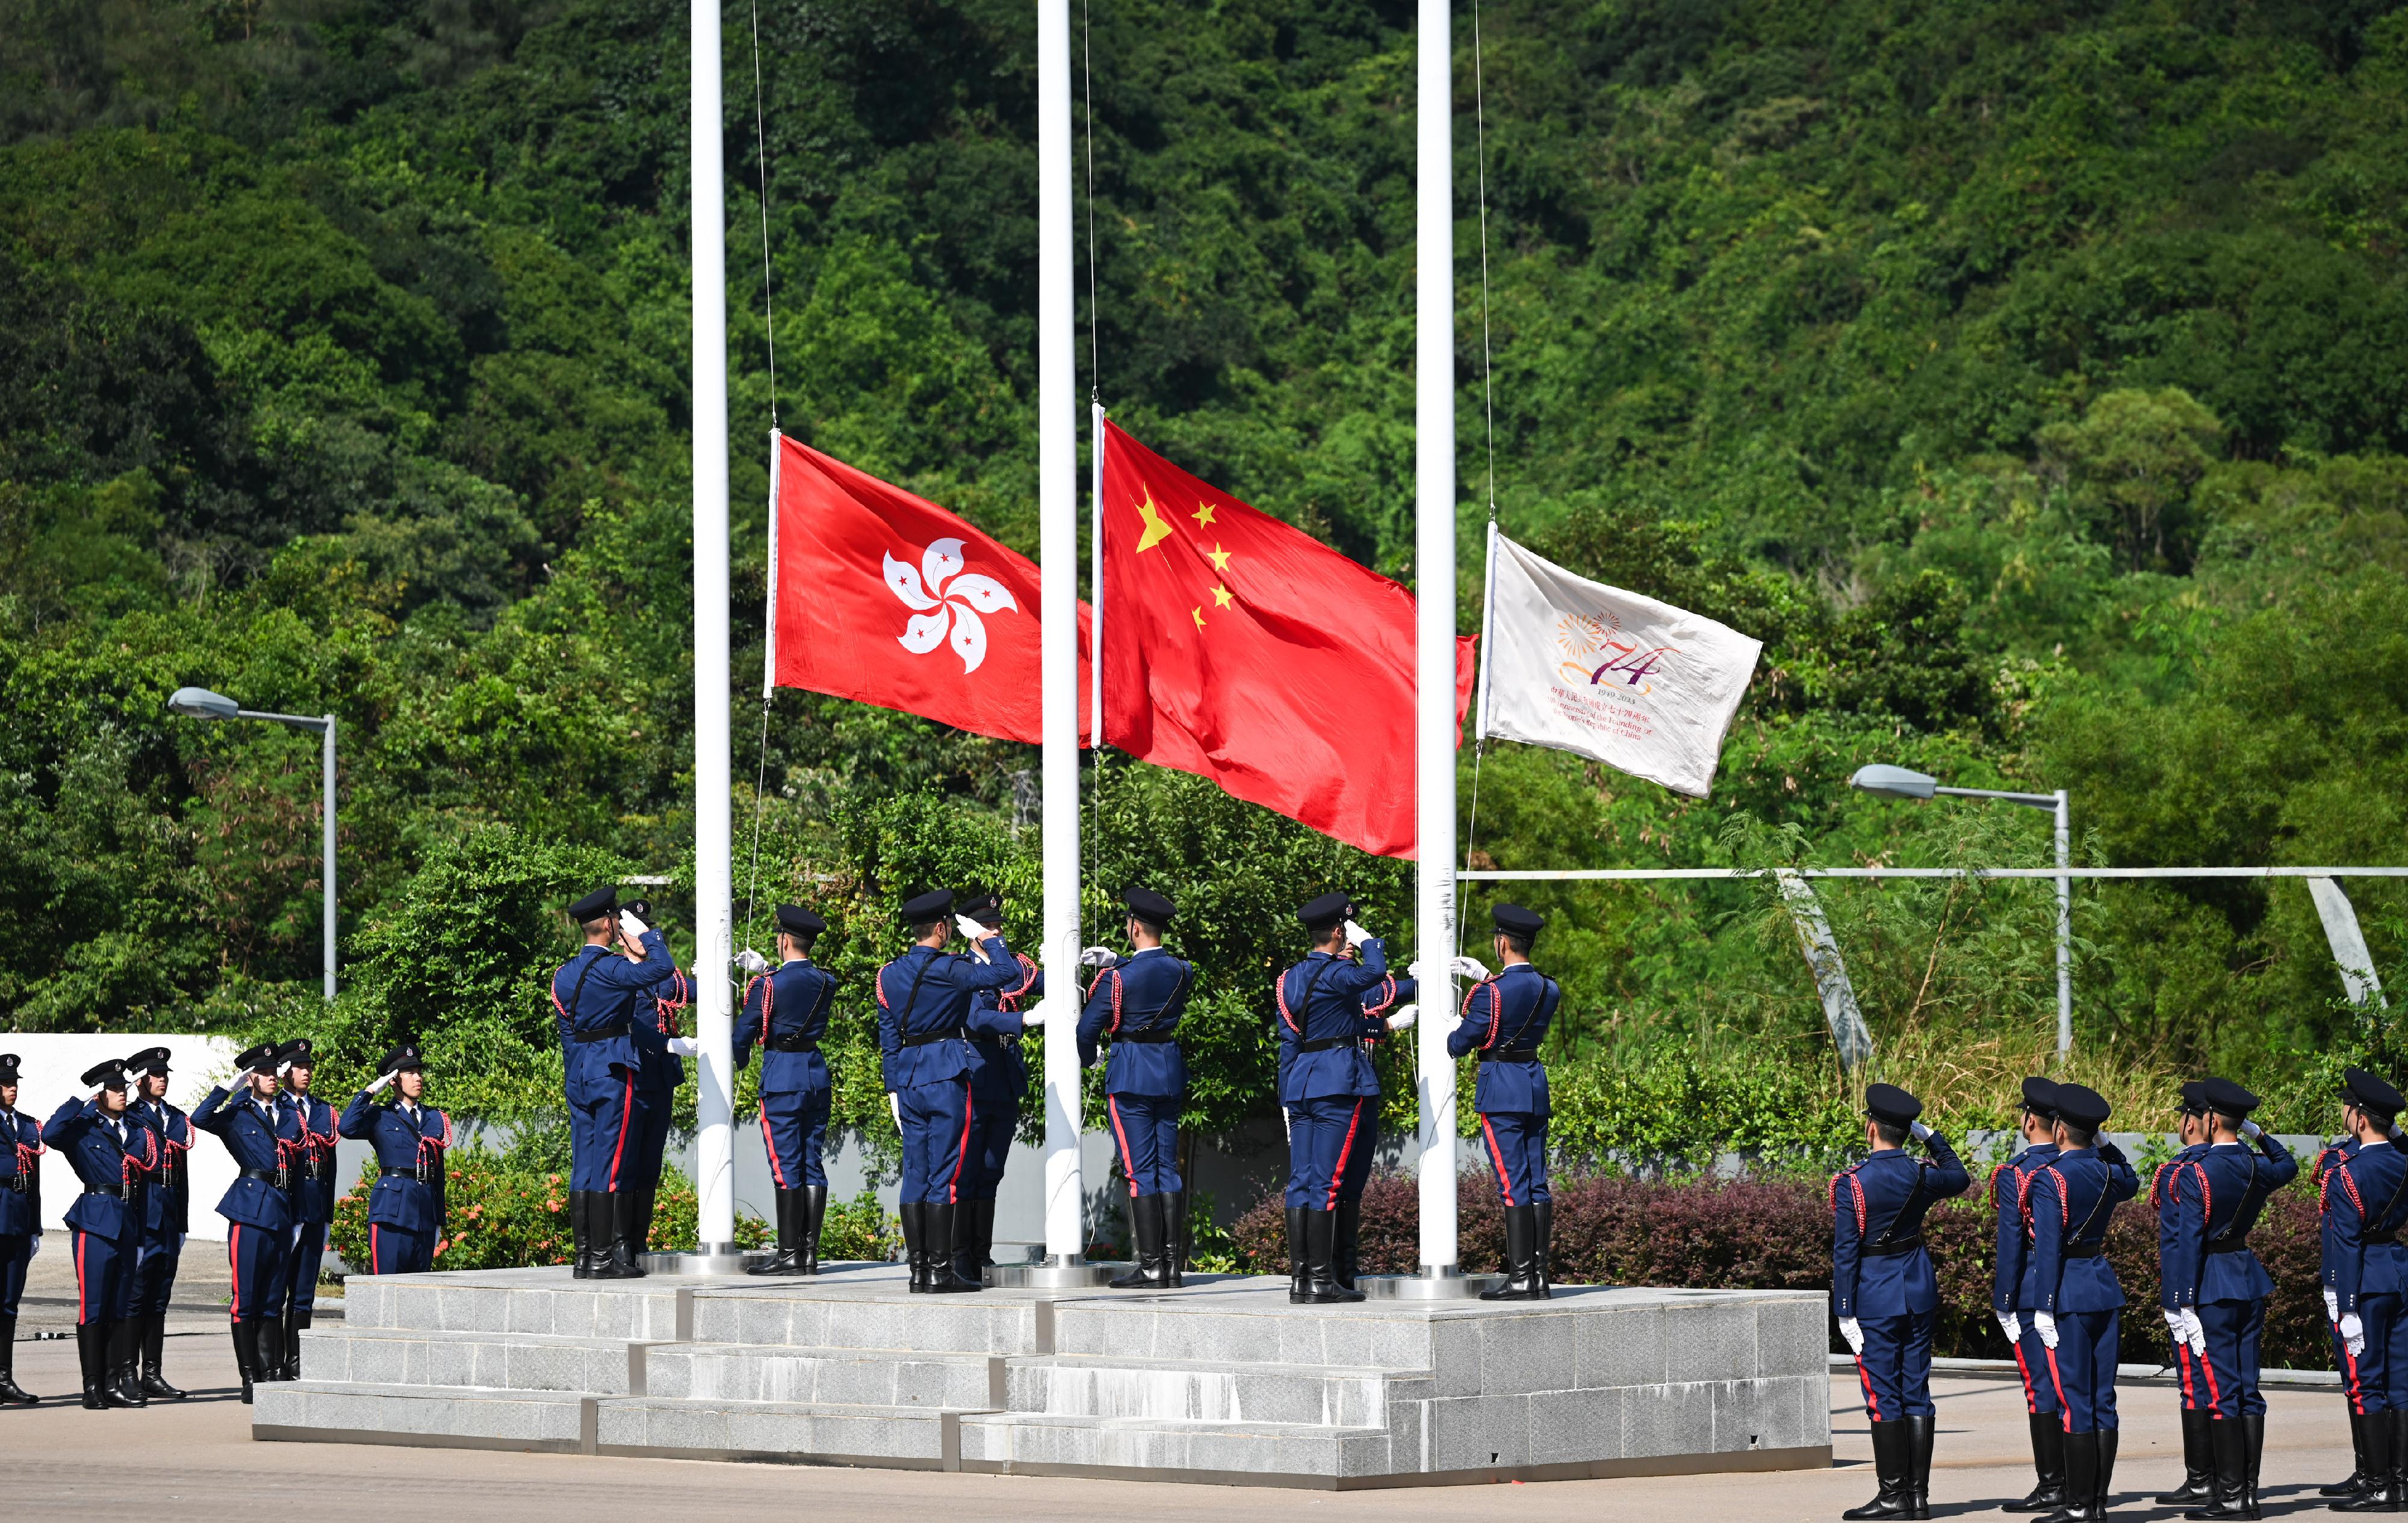 The Security Bureau led its disciplined services and auxiliary services, together with youth uniformed groups, to hold the Parade by Disciplined Services and Youth Groups cum Carnival for Celebrating the 74th Anniversary of the Founding of the People's Republic of China at the Fire and Ambulance Services Academy in Tseung Kwan O today (October 1) to celebrate the National Day with members of the public. Photo shows the Fire Services Department flag party conducting a flag-raising ceremony.
